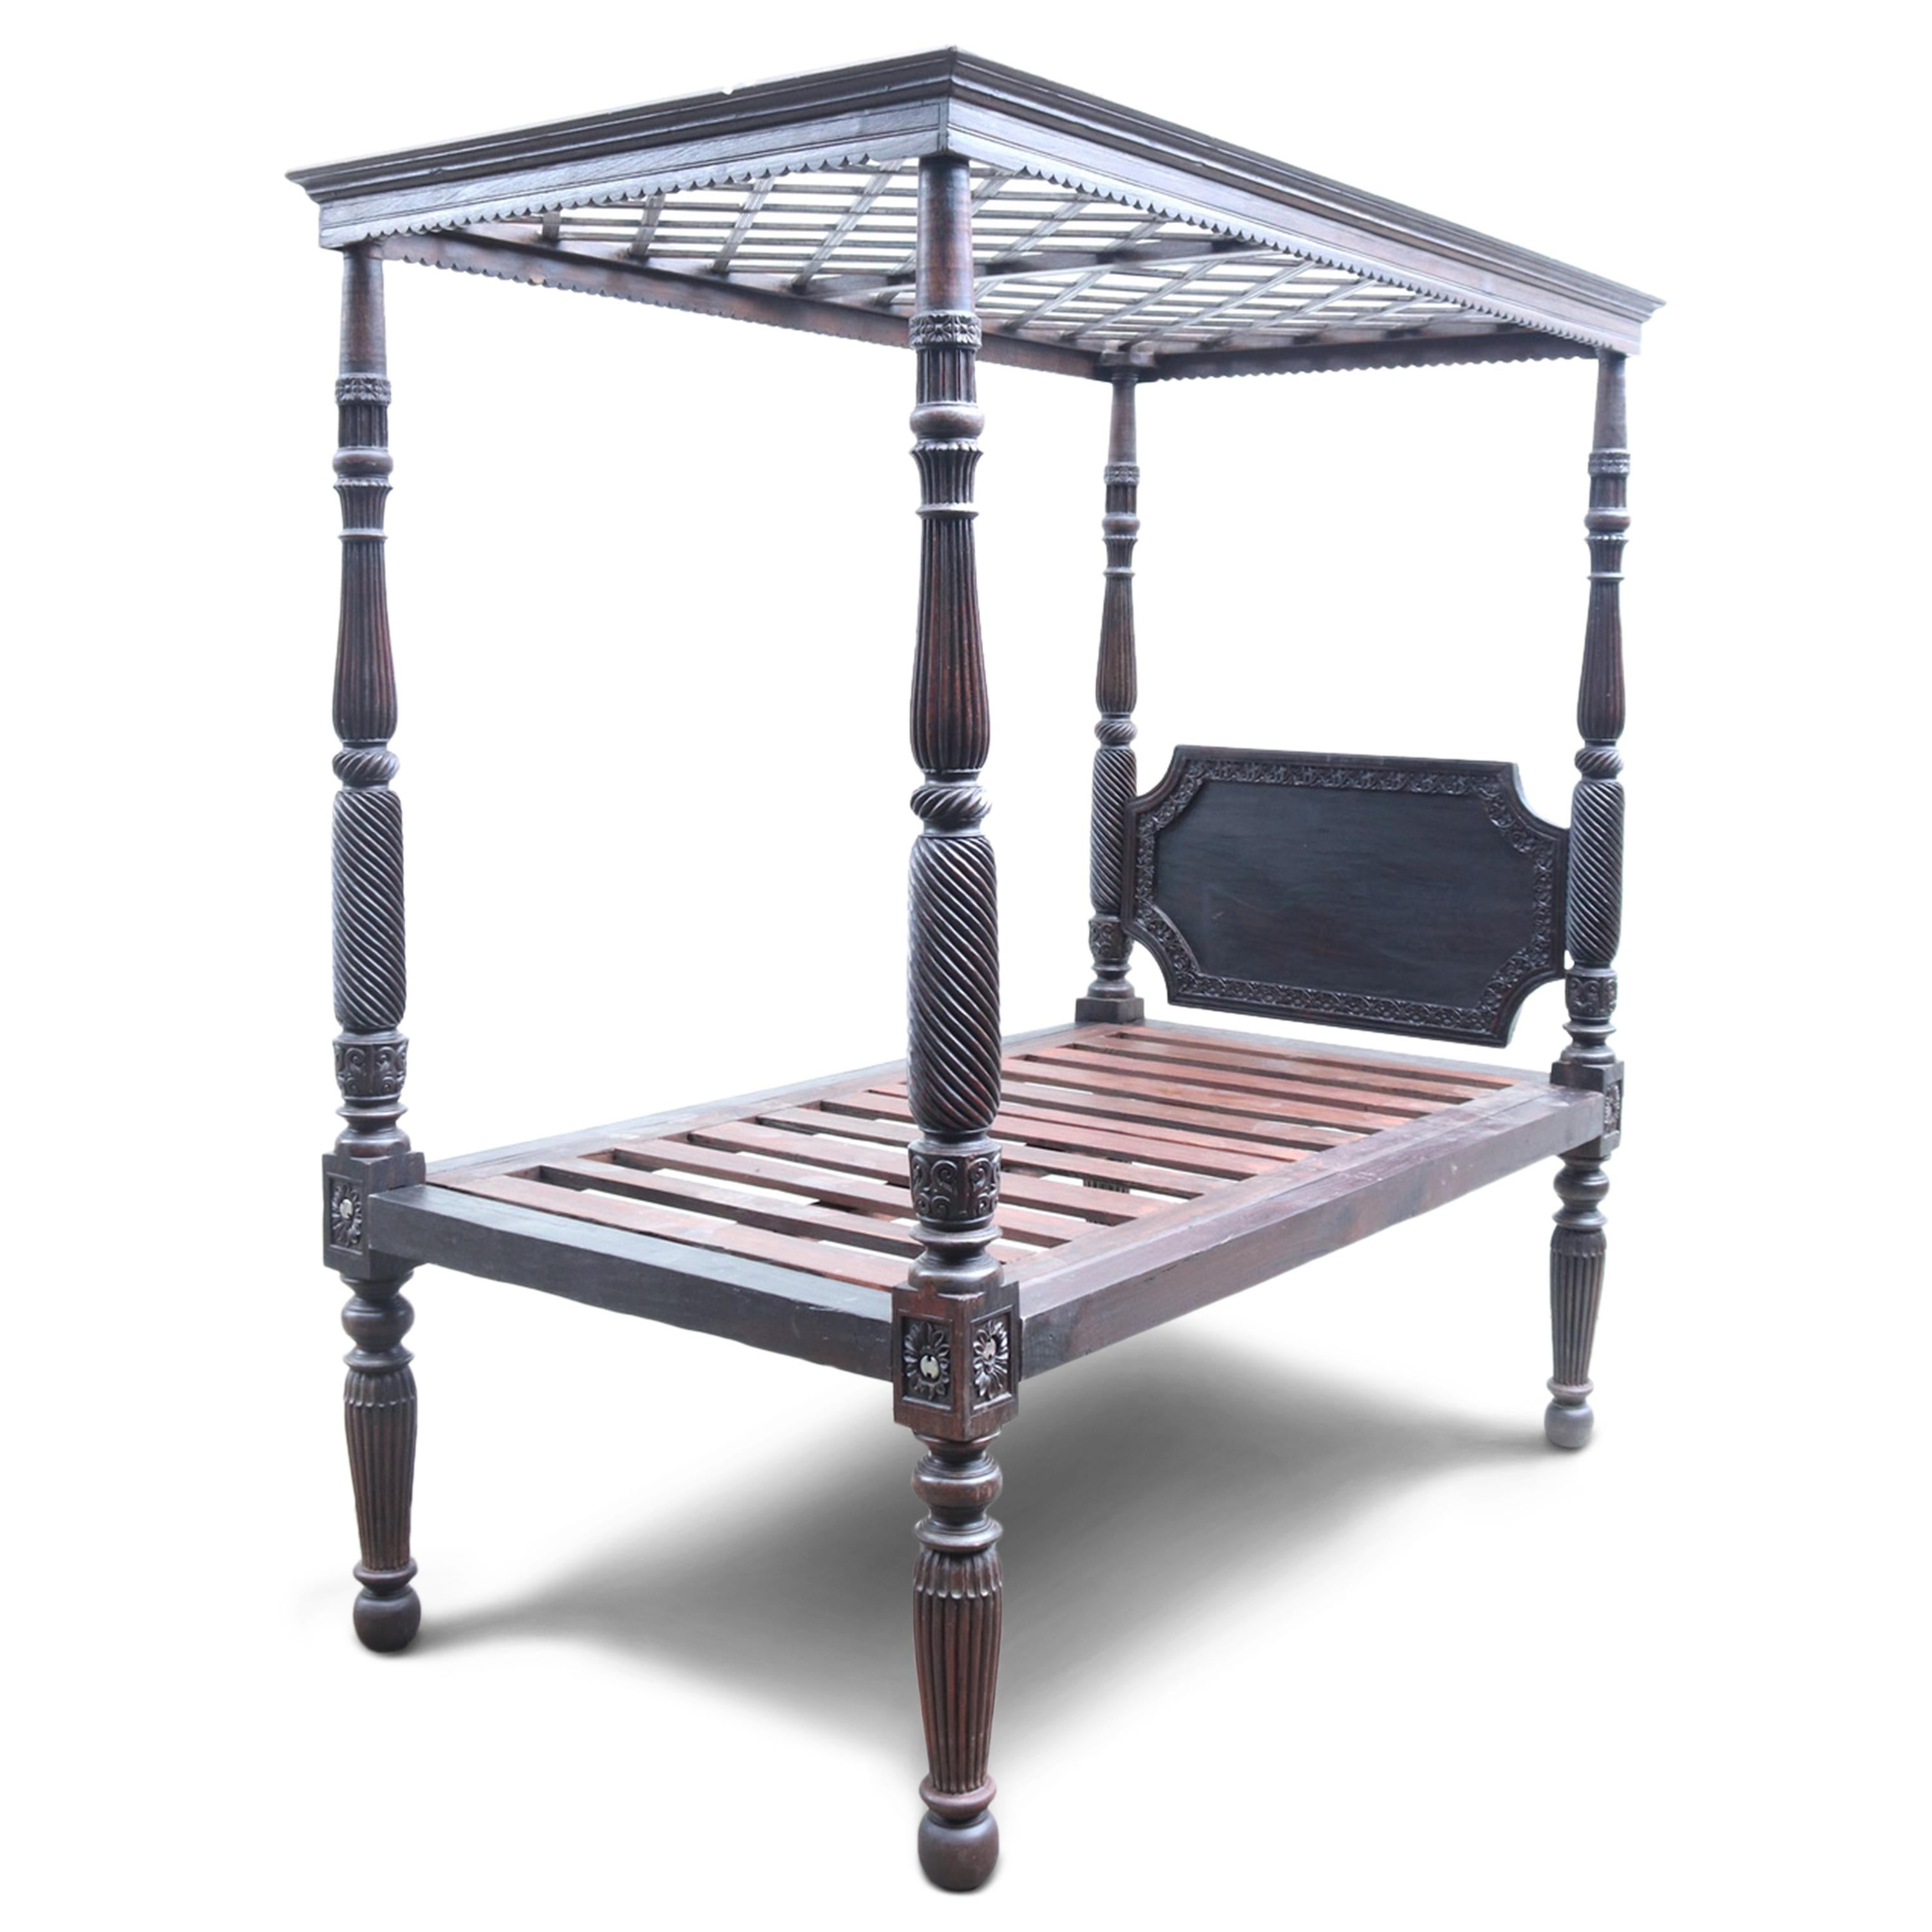 An 18th-century Rosewood tester/canopy bed originating from a significant palace in Goa. The bed features exquisitely carved posts, and the solid wood headboard contributes a blend of simplicity and robust elegance. Completing the regal presence of